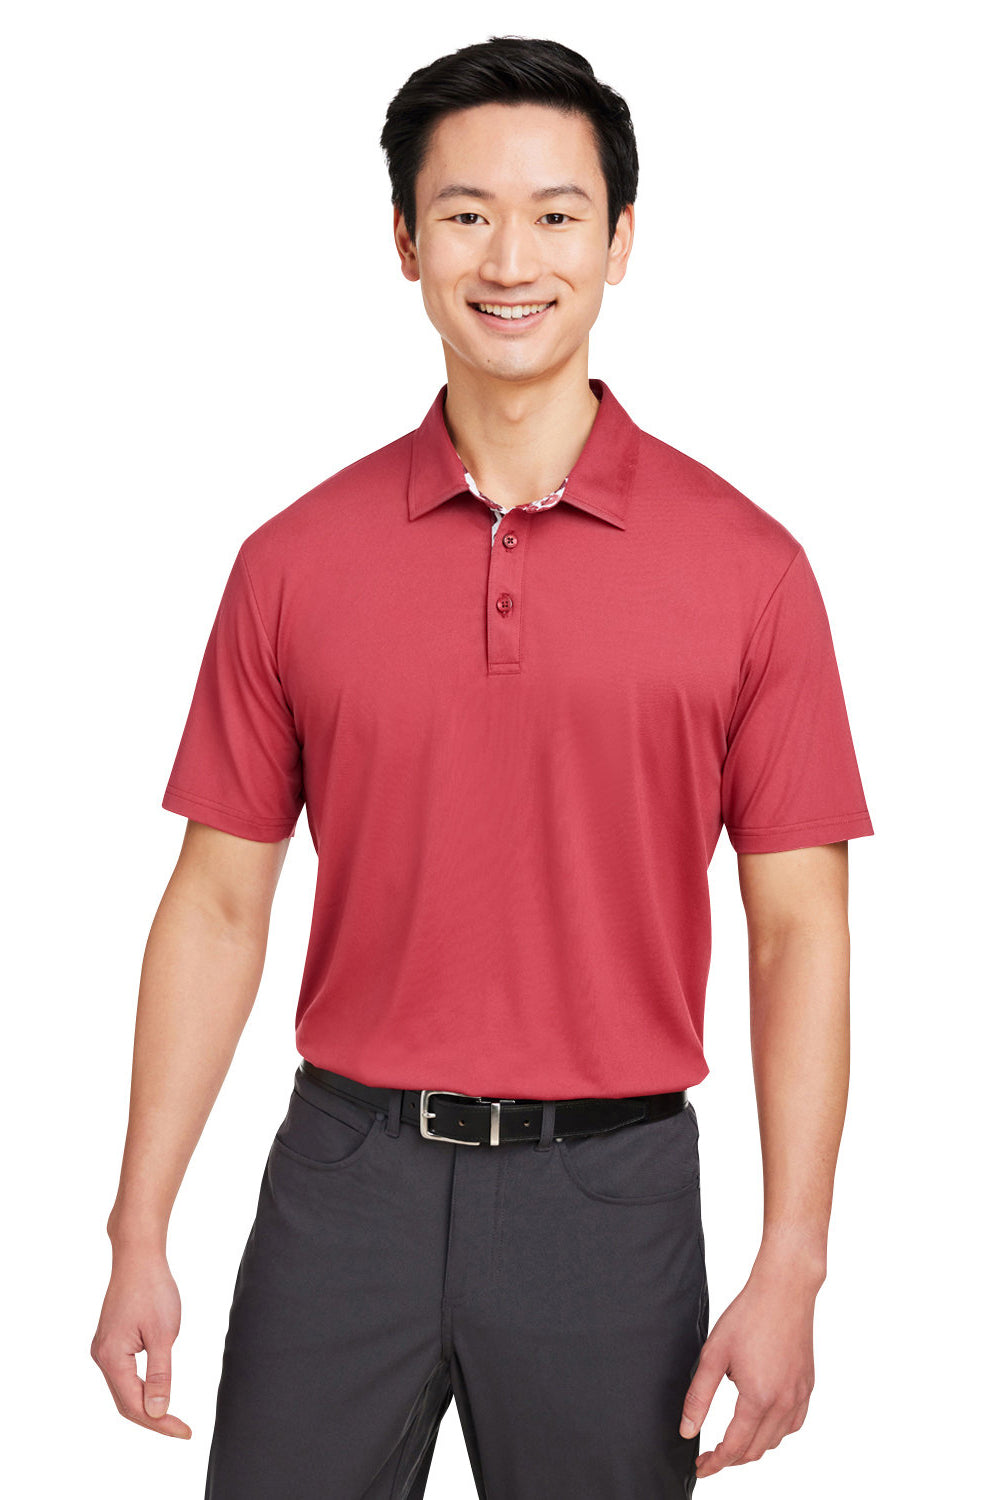 Swannies Golf SW2000 Mens James Short Sleeve Polo Shirt Heather Red Front